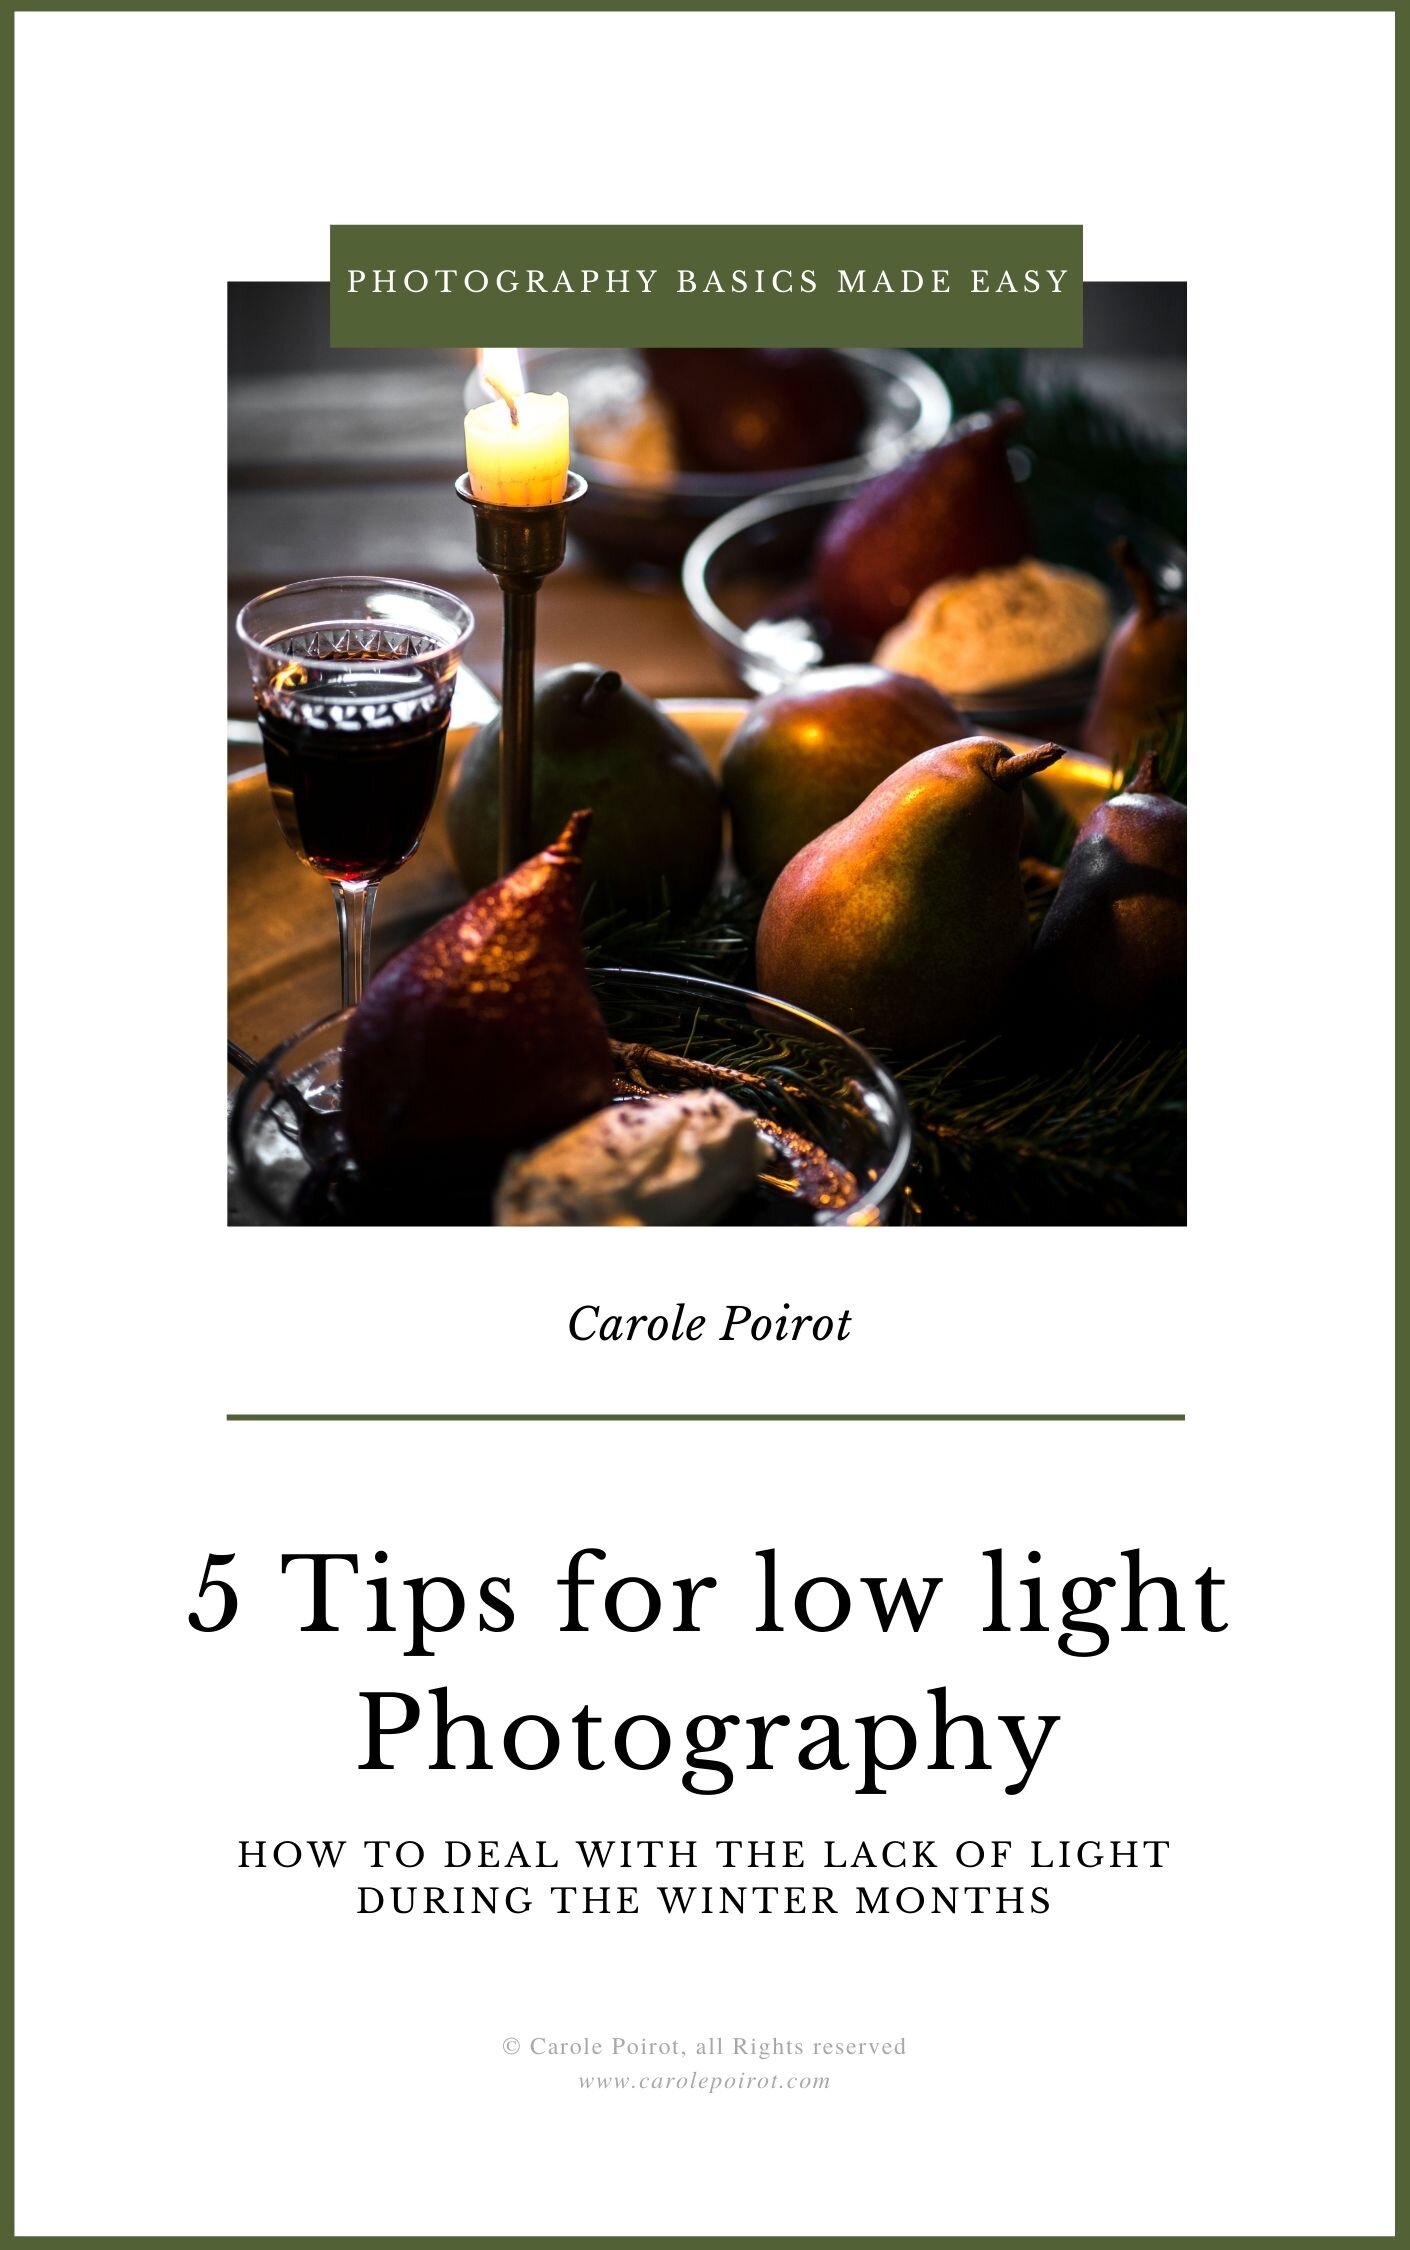 5 Tips for low light Photography.jpg